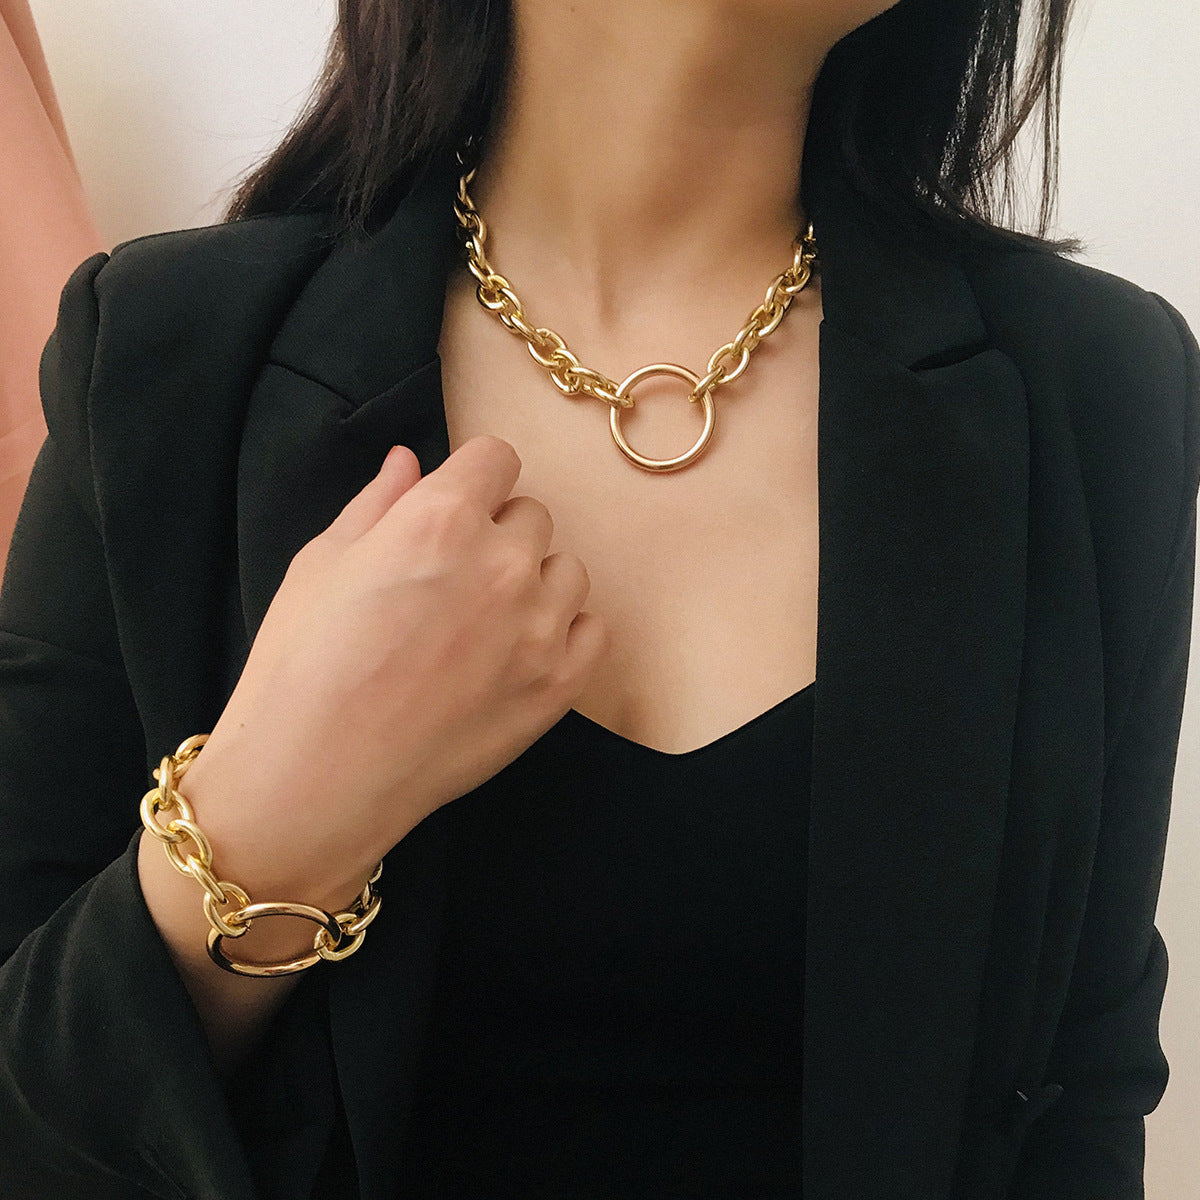 A woman wearing a black jacket and a Maramalive™ Personality Punk Exaggerated Metal Necklace Necklace Simple Geometric Circle Retro Necklace Bracelet Set bracelet.